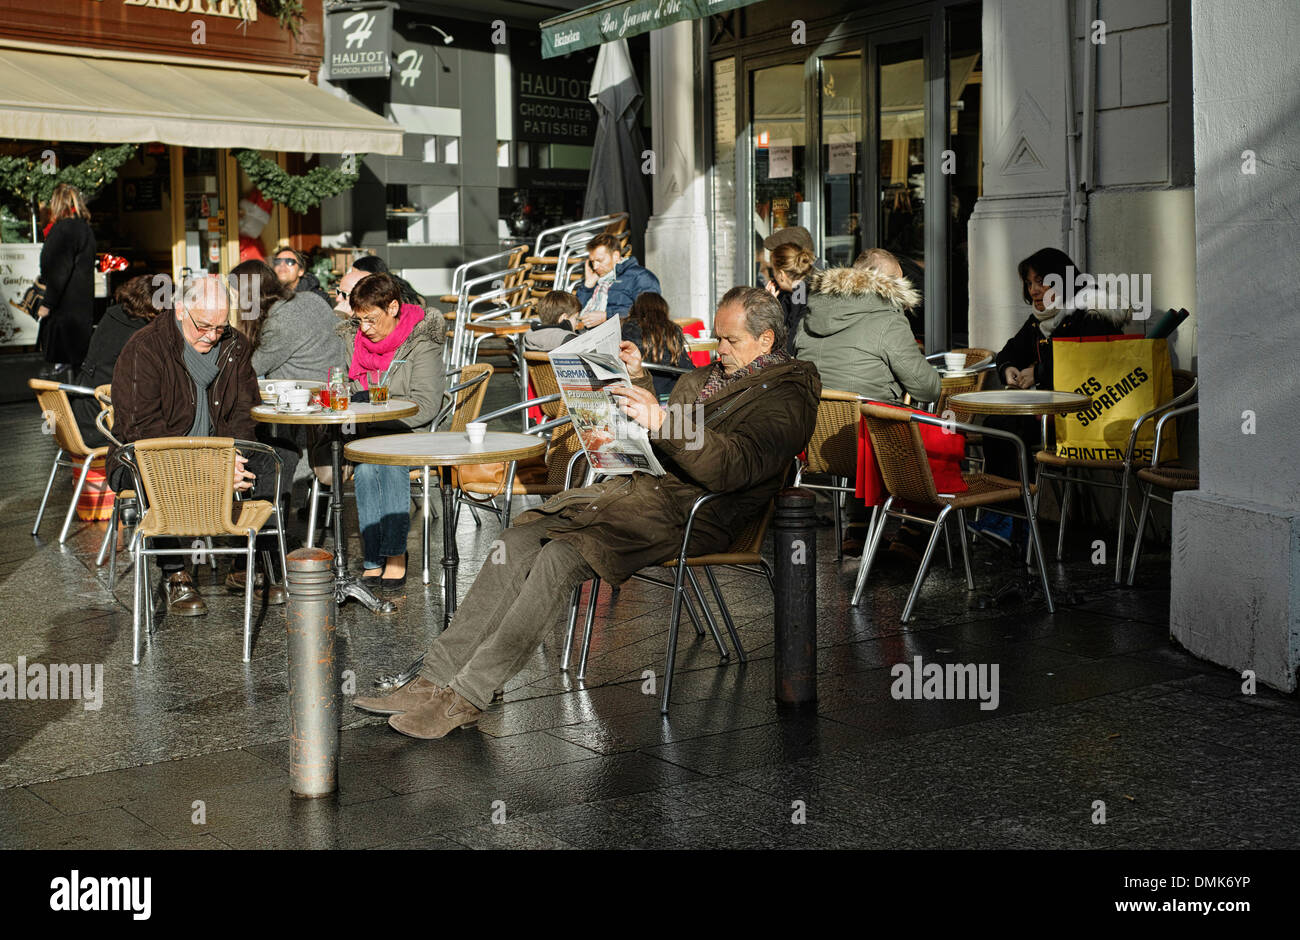 Saturday morning outside a cafe in Rouen, Normandy, France Stock Photo